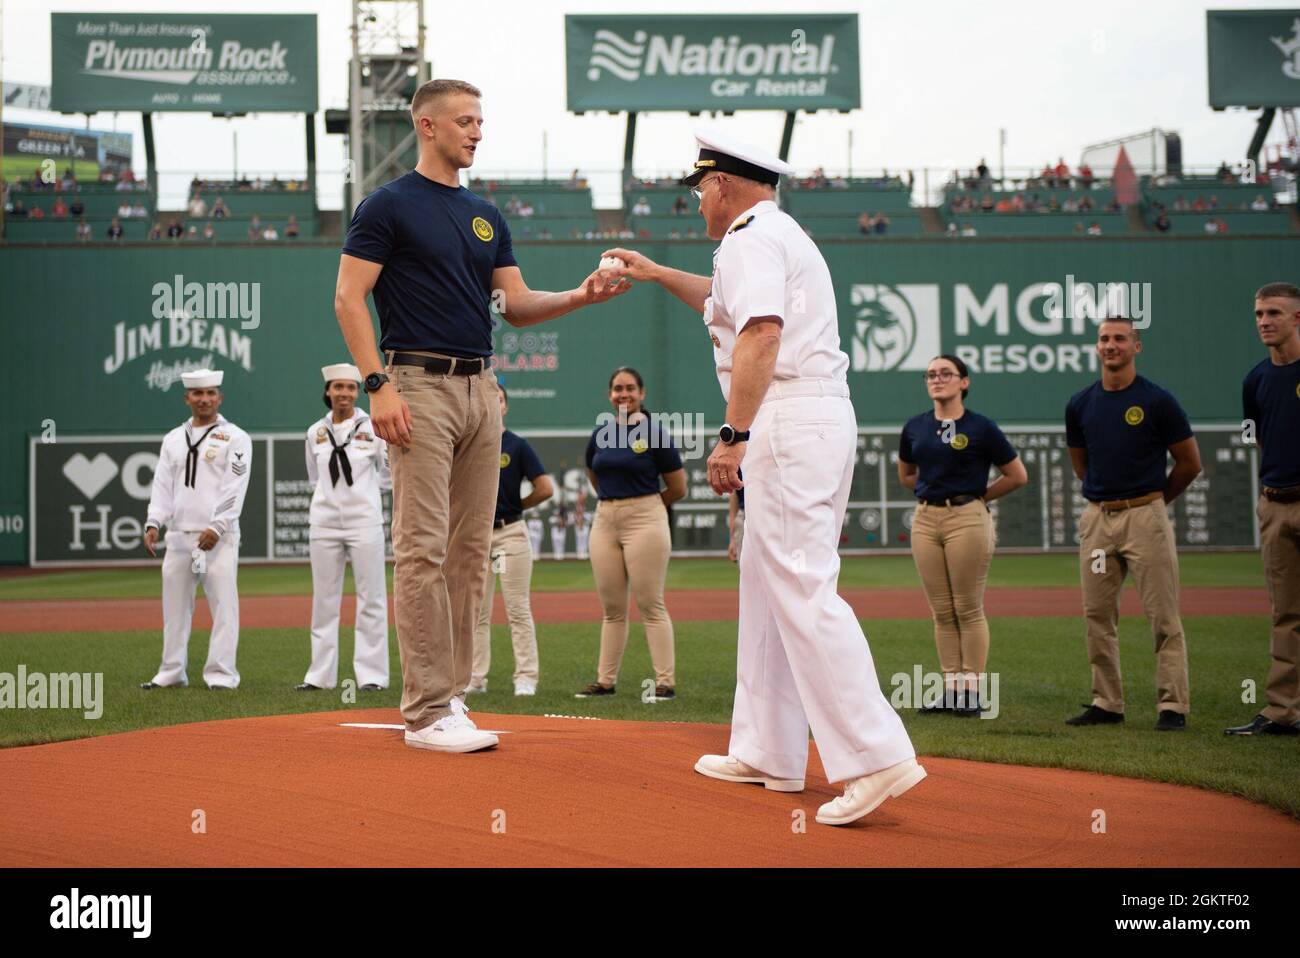 210629-N-BB269-1242 (June 29, 2021) Chief of Naval Operations Adm. Mike Gilday hands the first pitch to a newly-enlisted Navy Sailor to throw at a Red Sox baseball game at Fenway Park, Boston. Prior to the game, CNO administered the oath of enlistment to future U.S. Navy Sailors, Strike Fighter Squadron 213 (VFA-213) the Blacklions conducted a fly over, a Navy Band D.C. vocalist sang the national anthem, and the USS Constitution color guard paraded the colors in front of the audience. Stock Photo